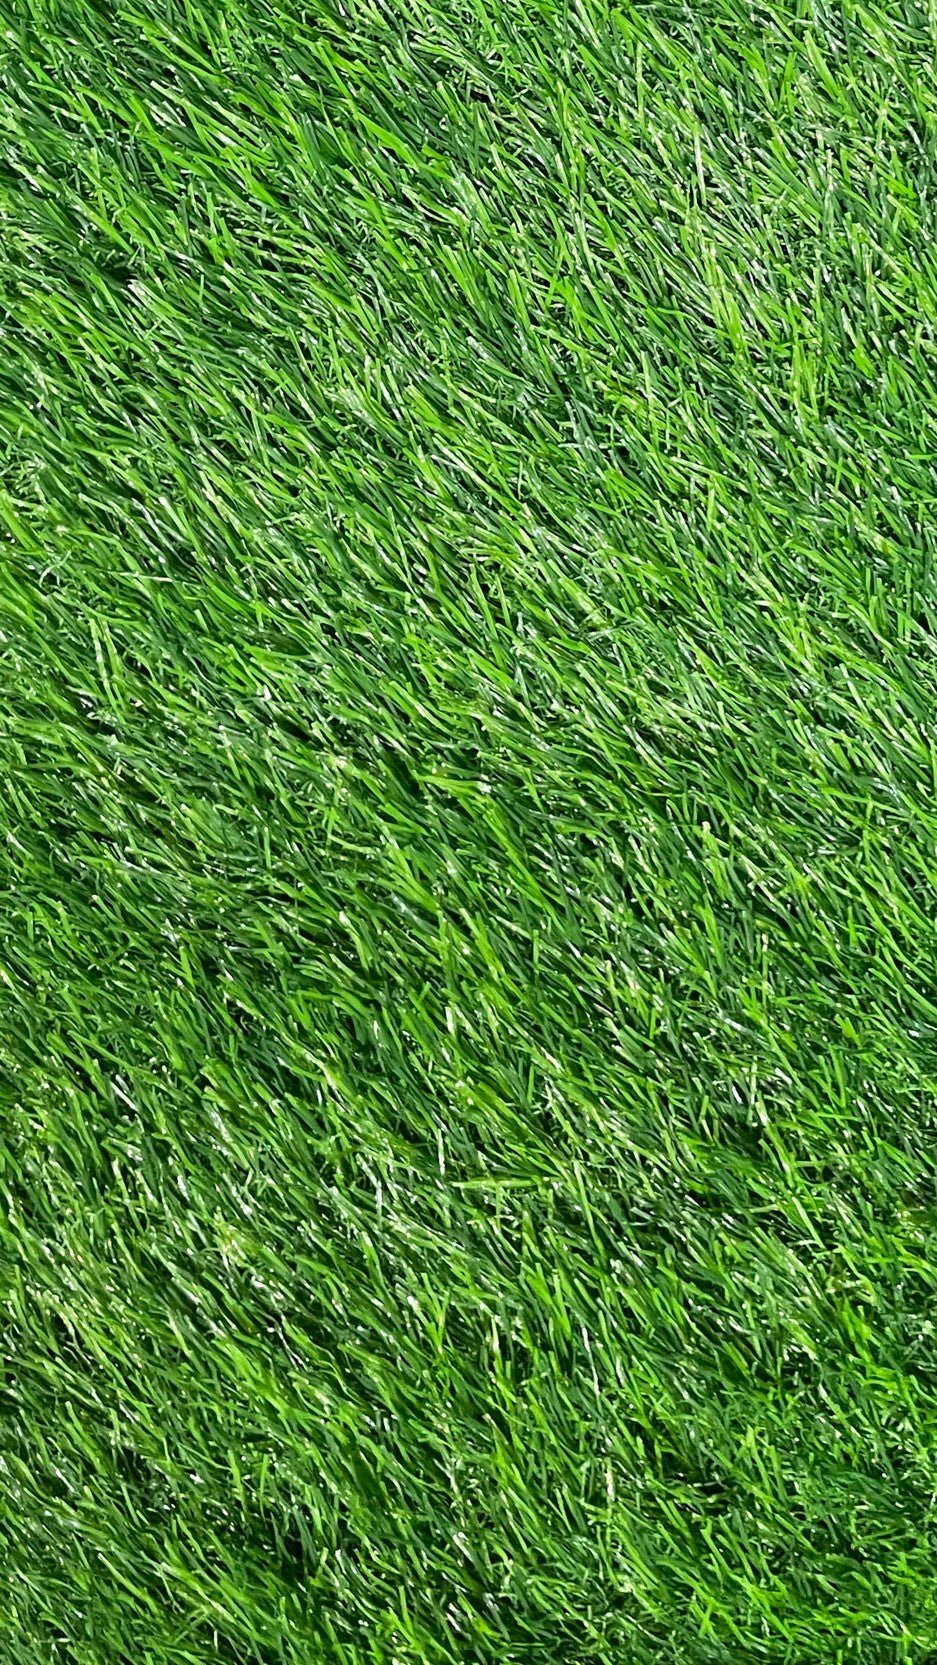 50 MM Grass Munich Artificial Grass for Indoor and Outdoor Use, Soft and Lush Natural Looking - V Surfaces